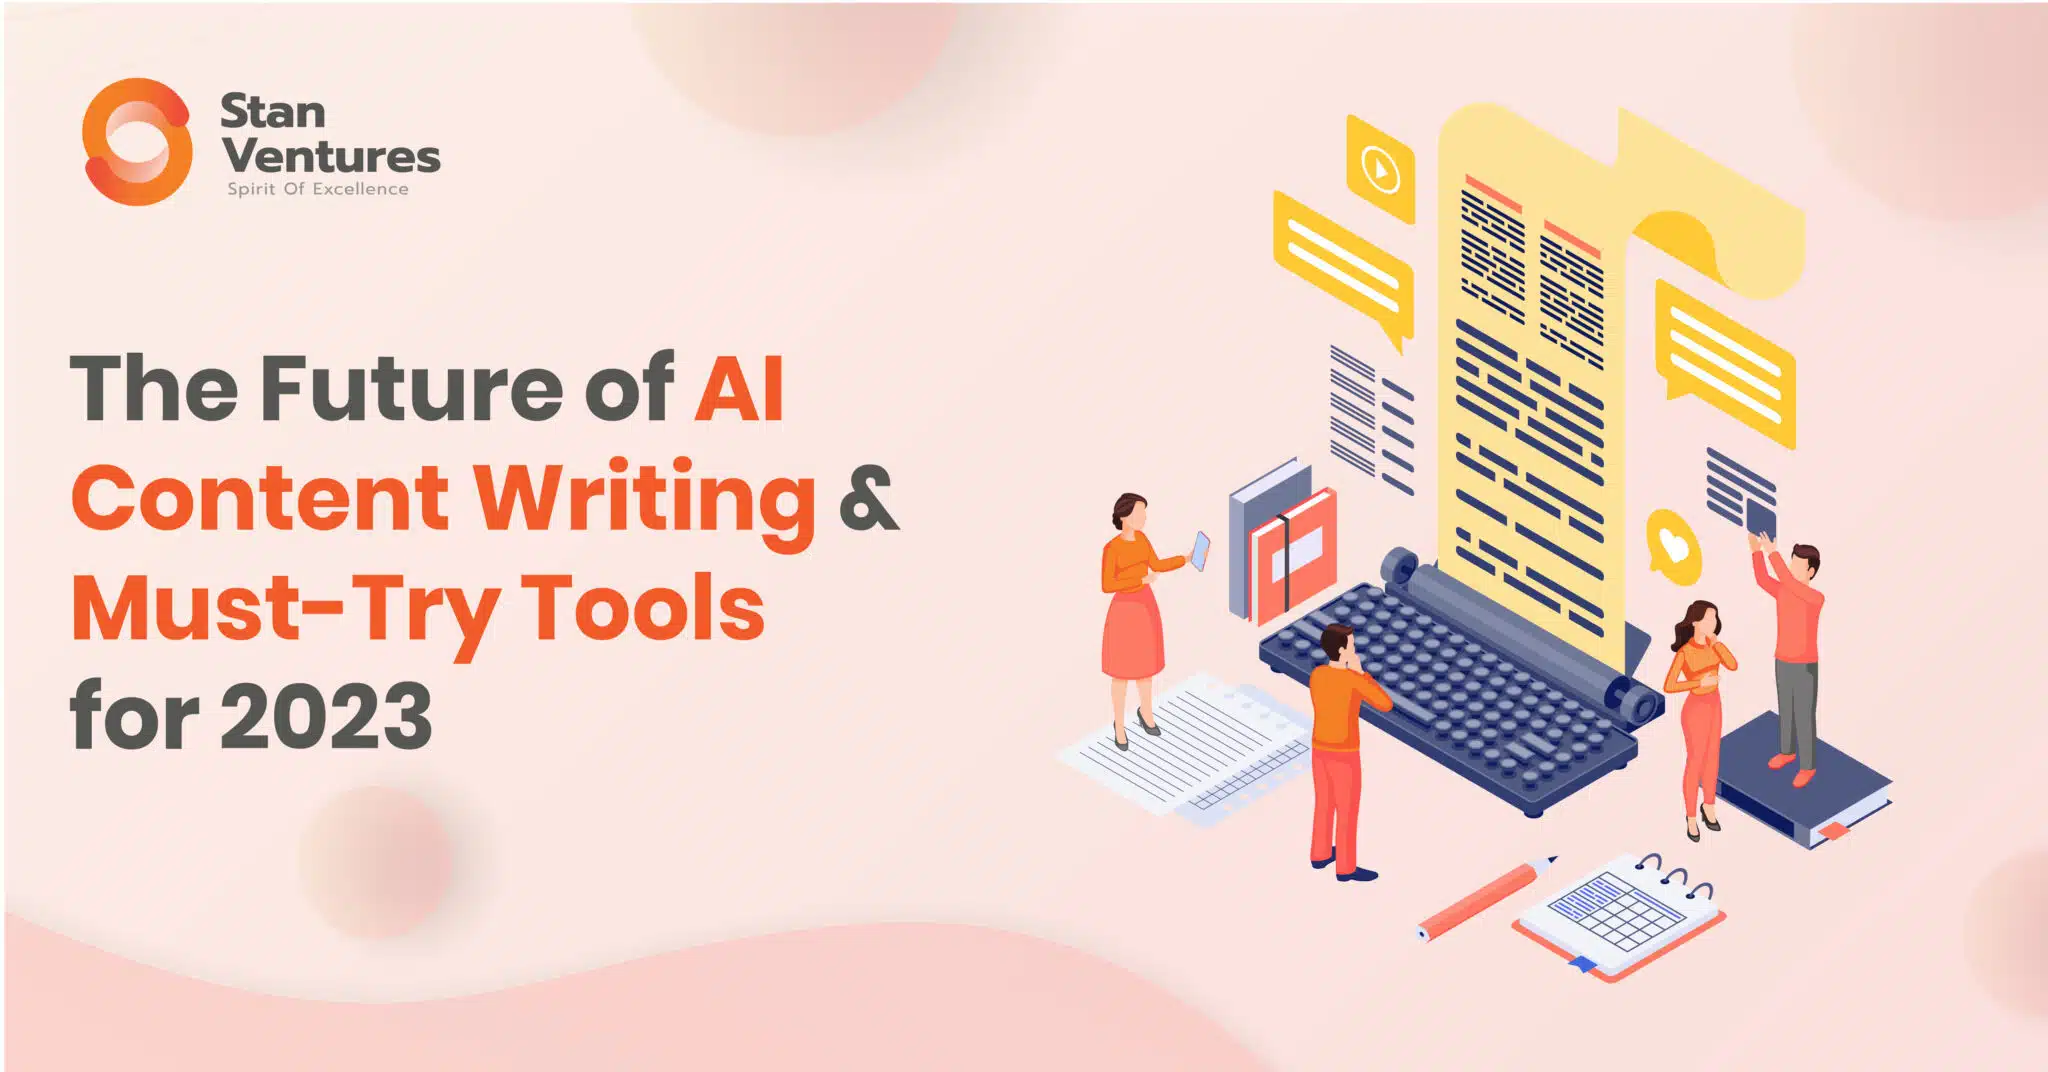 The Future of AI Content Writing & Must-Try Tools for 2023 - Featured image